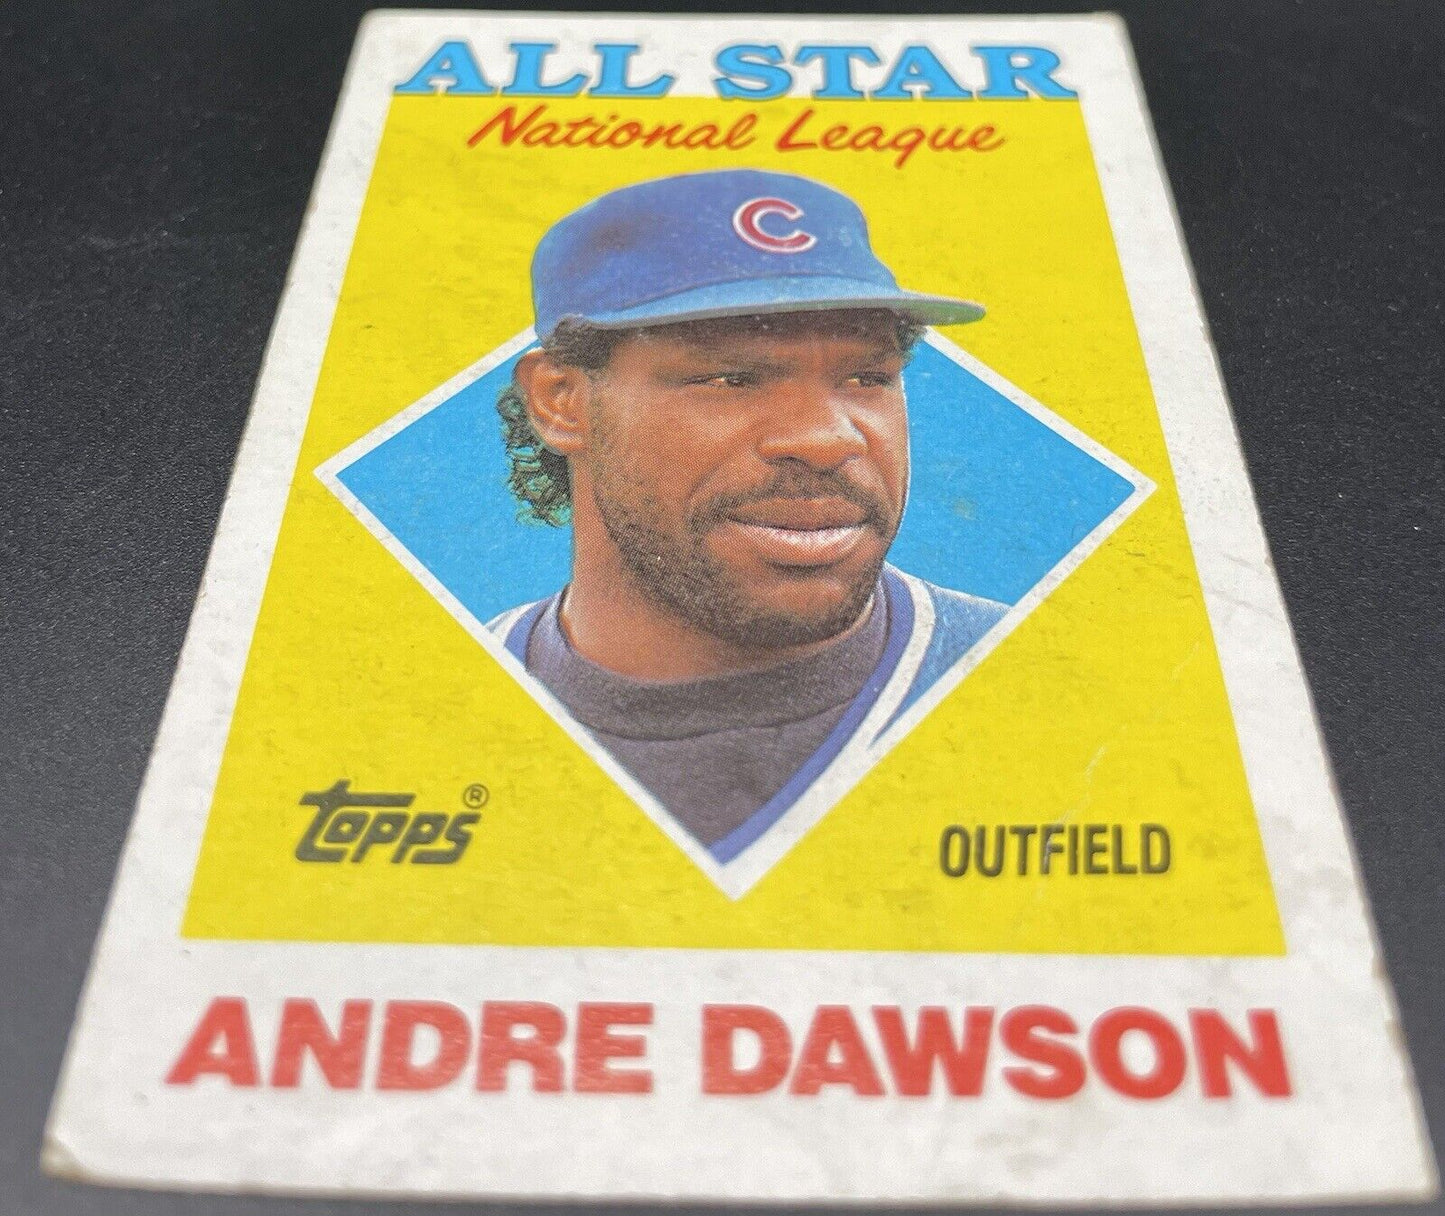 1988 Topps - All Star #401 Andre Dawson